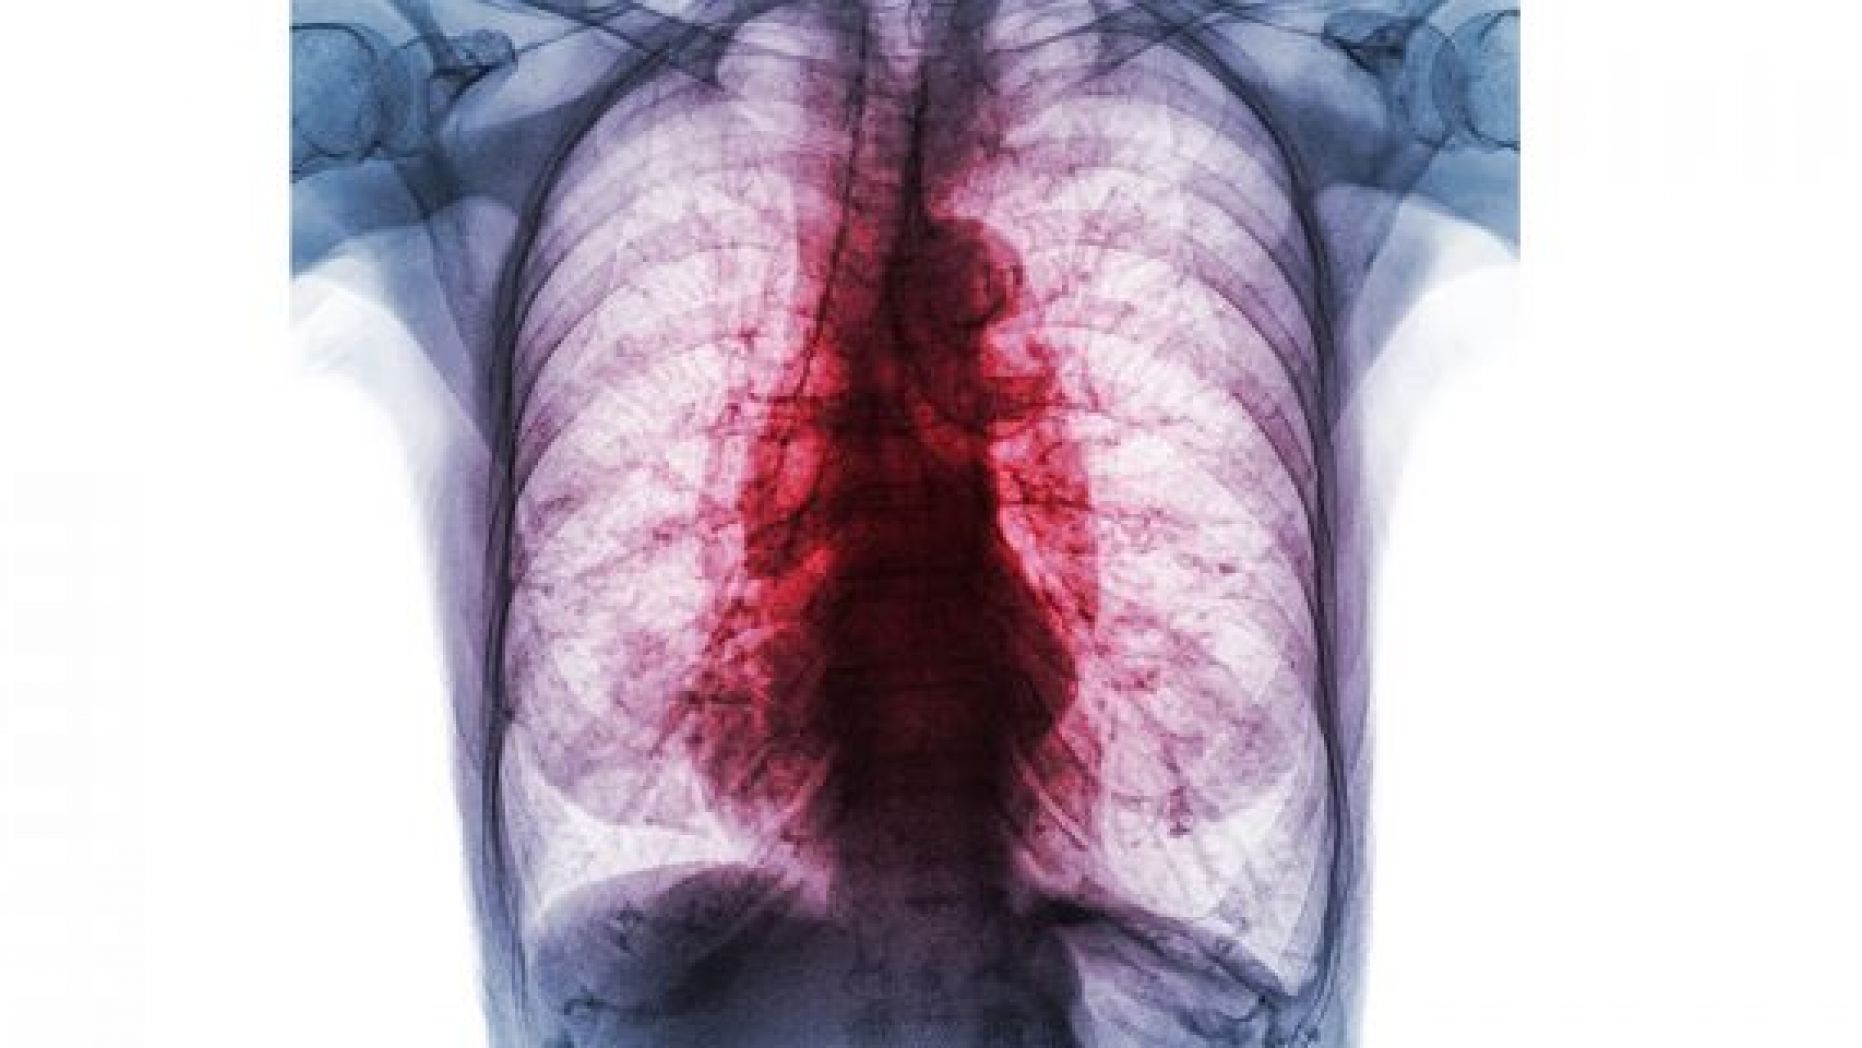 An x-ray showing the lungs of a person infected with pulmonary tuberculosis.